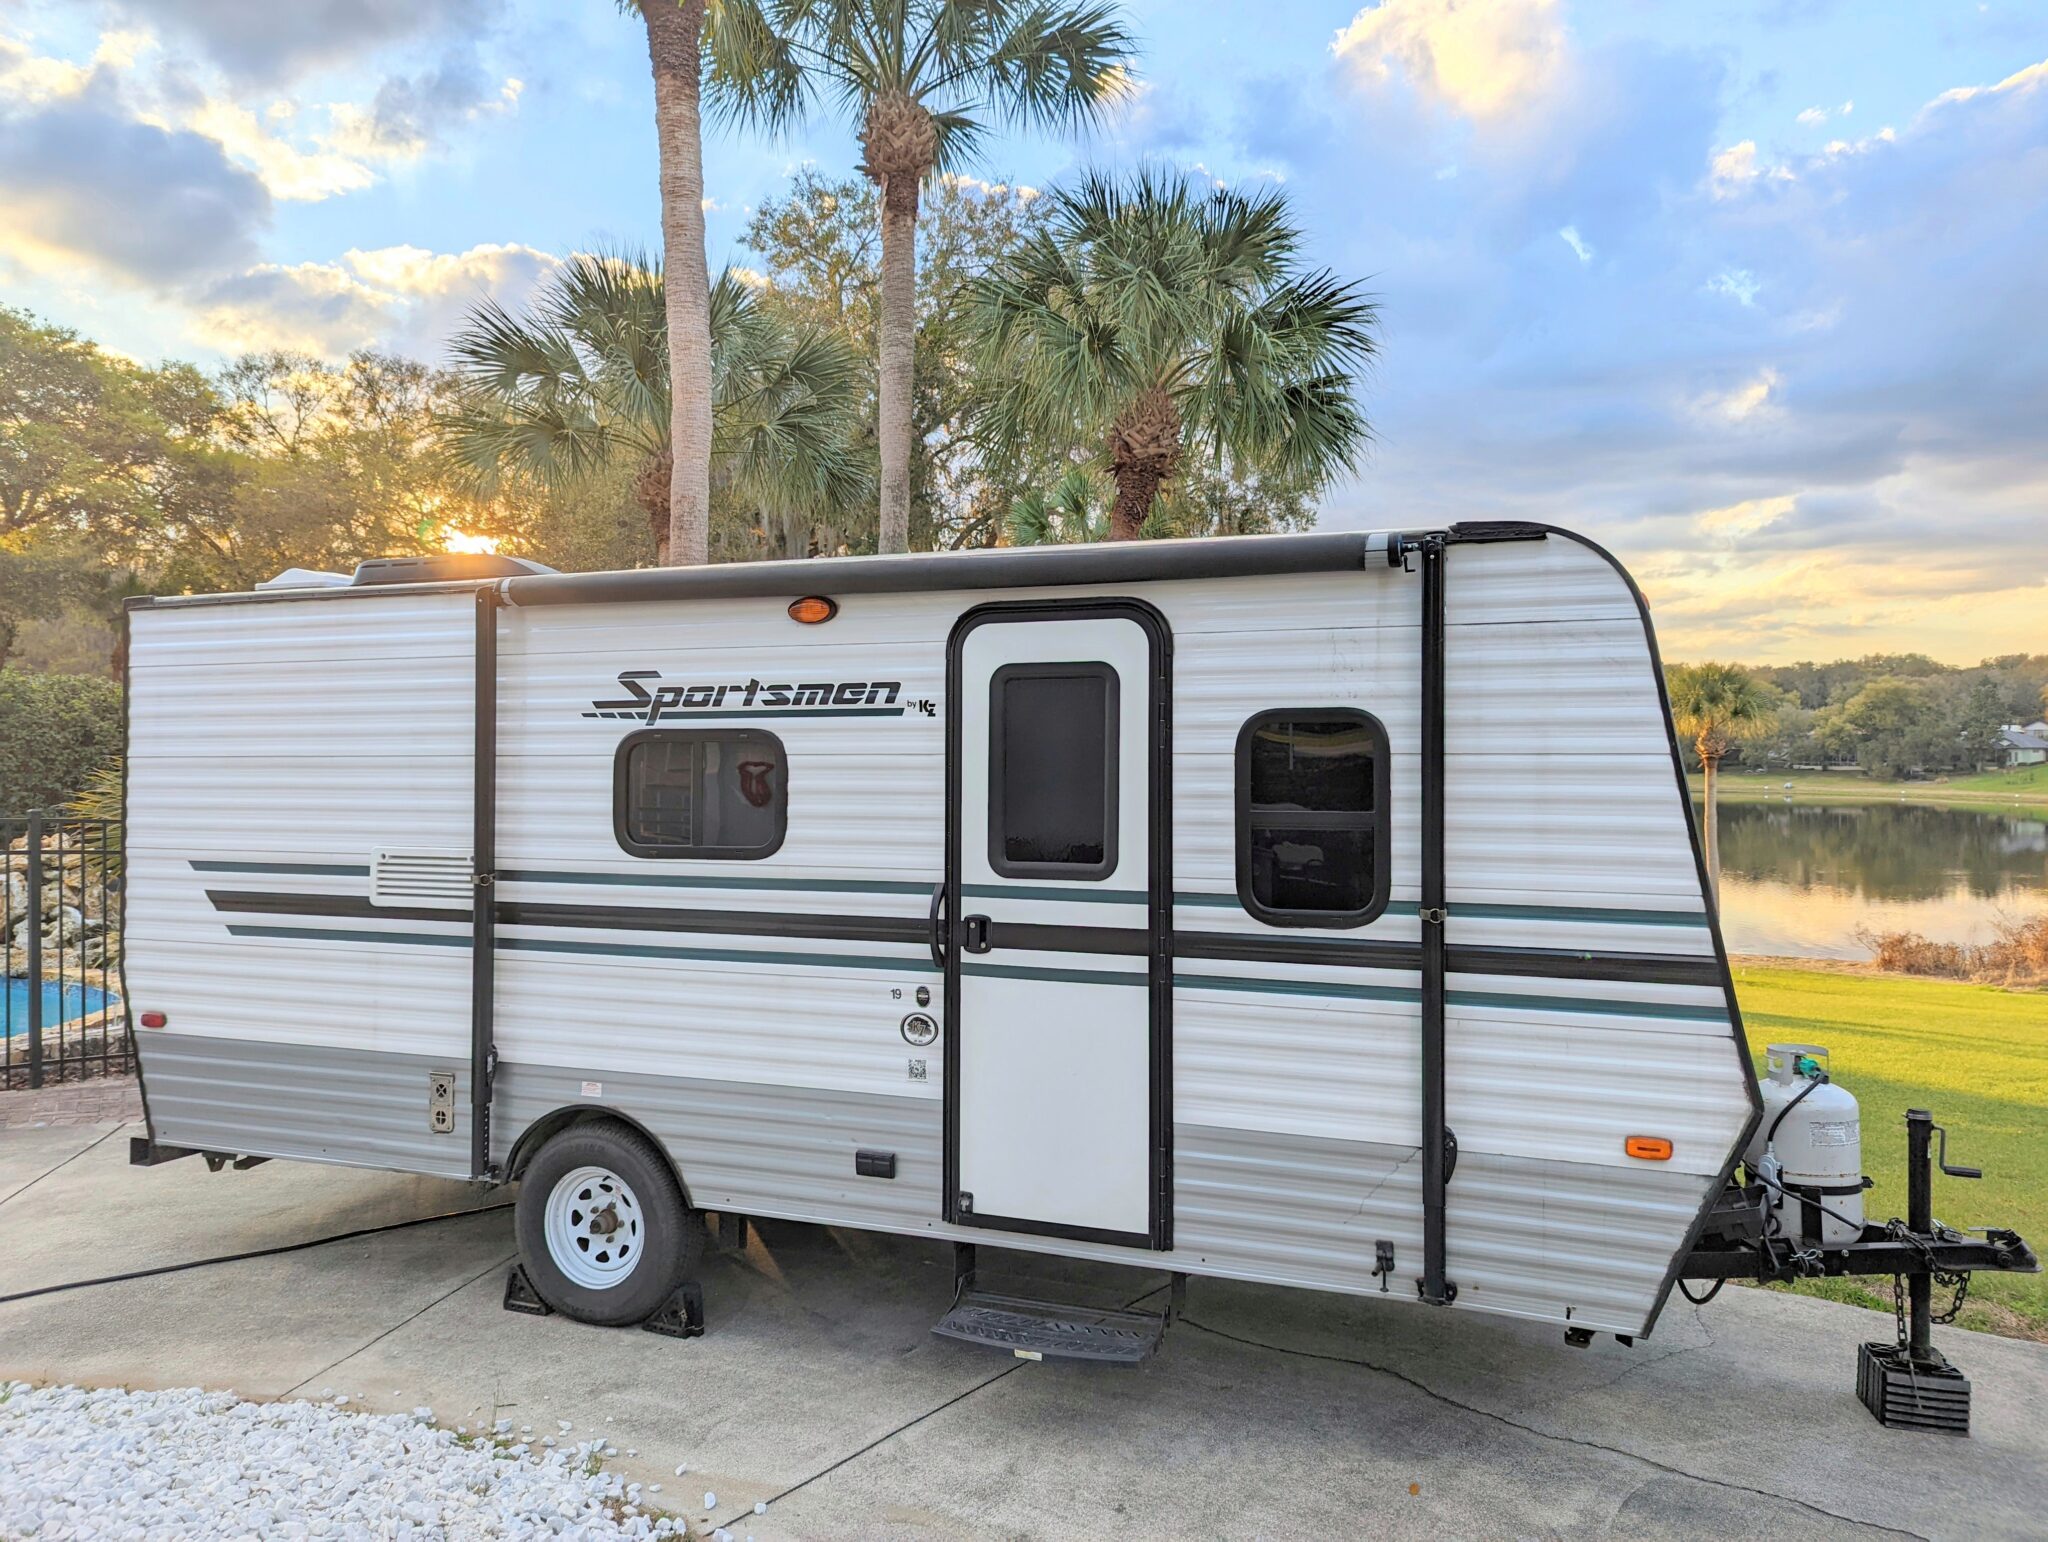 Renovated 2015 Sportsmen Glamper for Sale All Things with Purpose Sarah Lemp 16